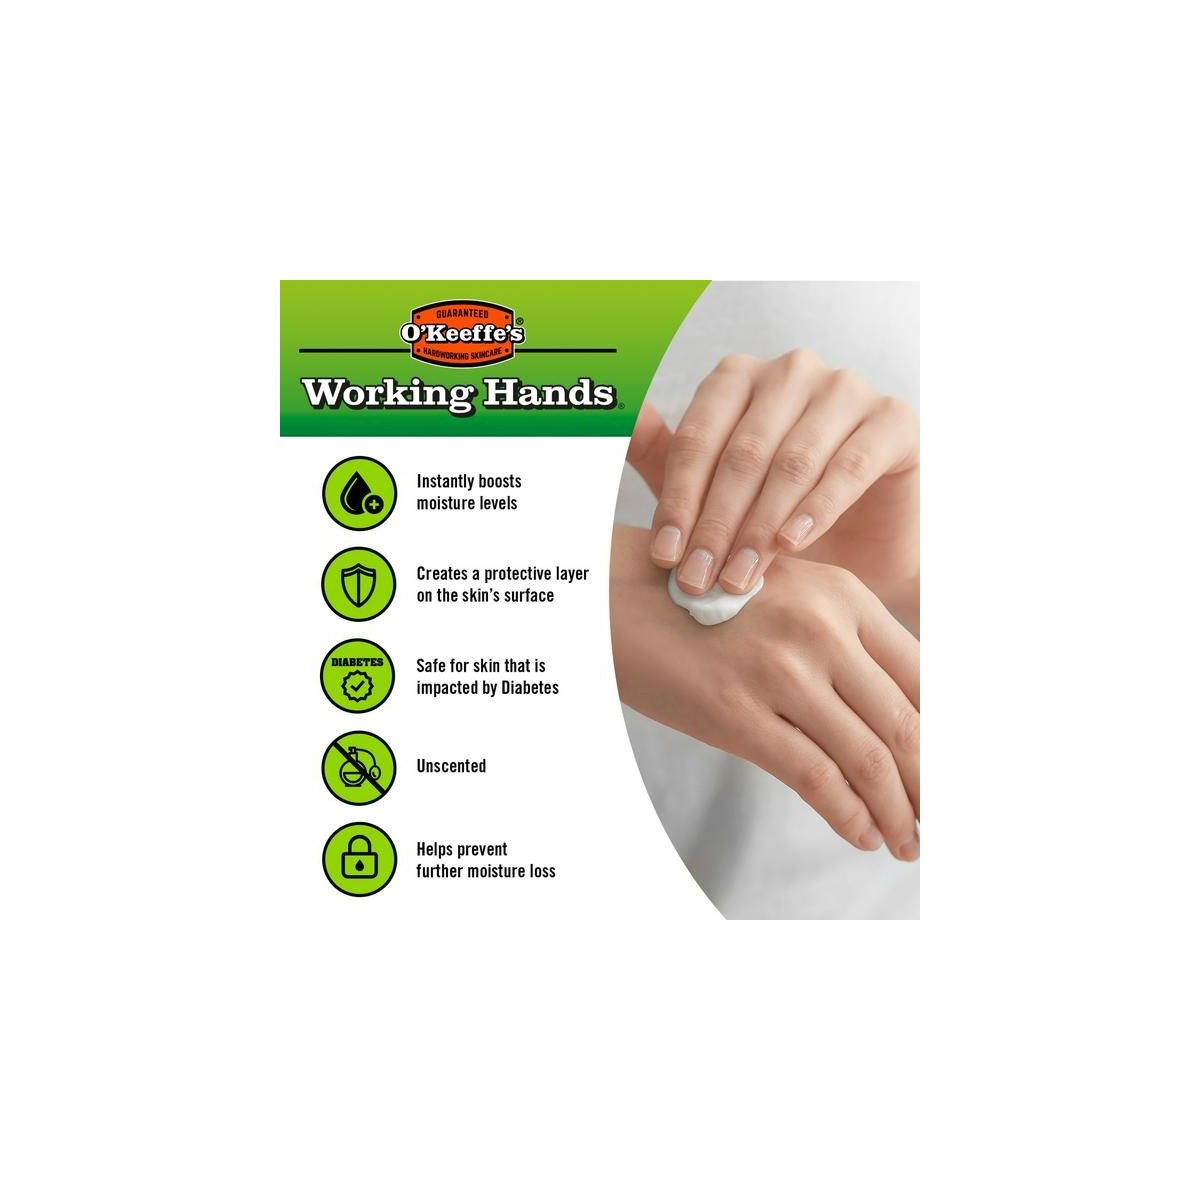 Best Product for Dry and Cracked Hands